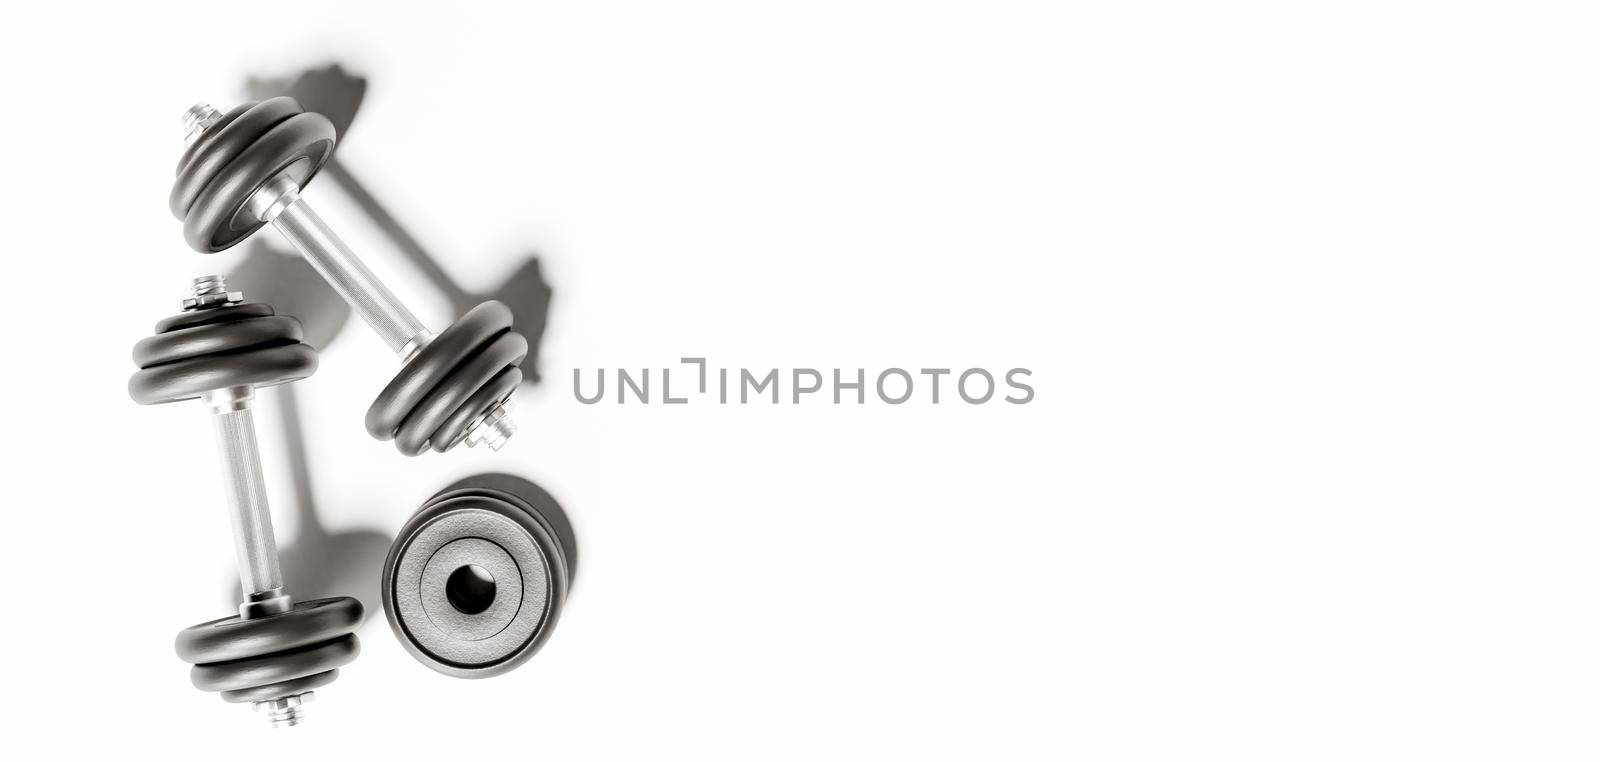 dumbbells with black discs on white background by asolano